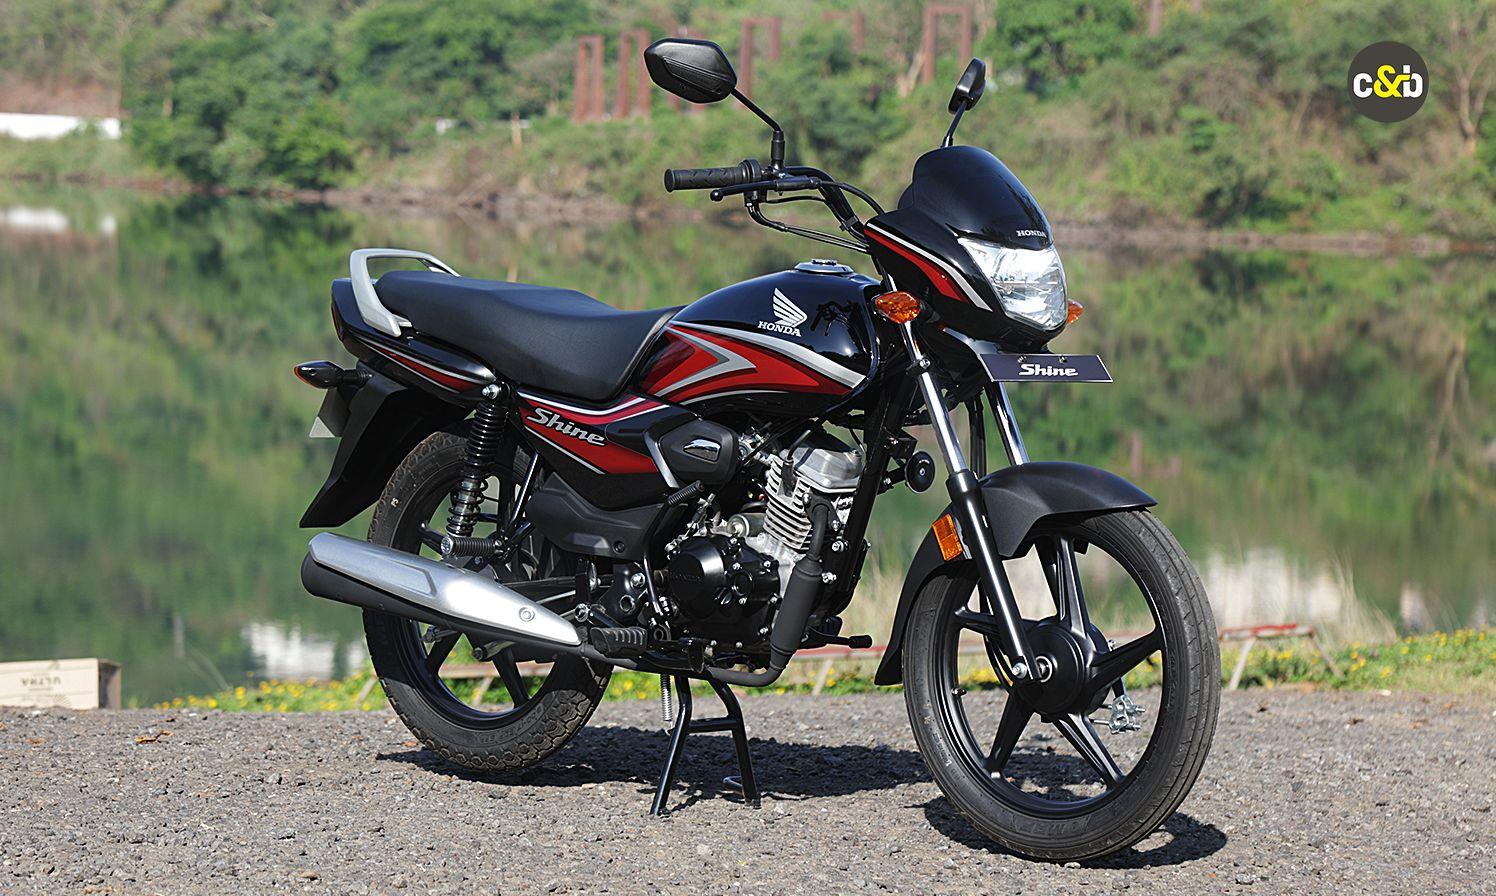 Is the new Honda Shine 100 good enough to take top spot in the 100 cc commuter motorcycle segment? We spent some time with the Shine 100 to get a sense of what it offers.